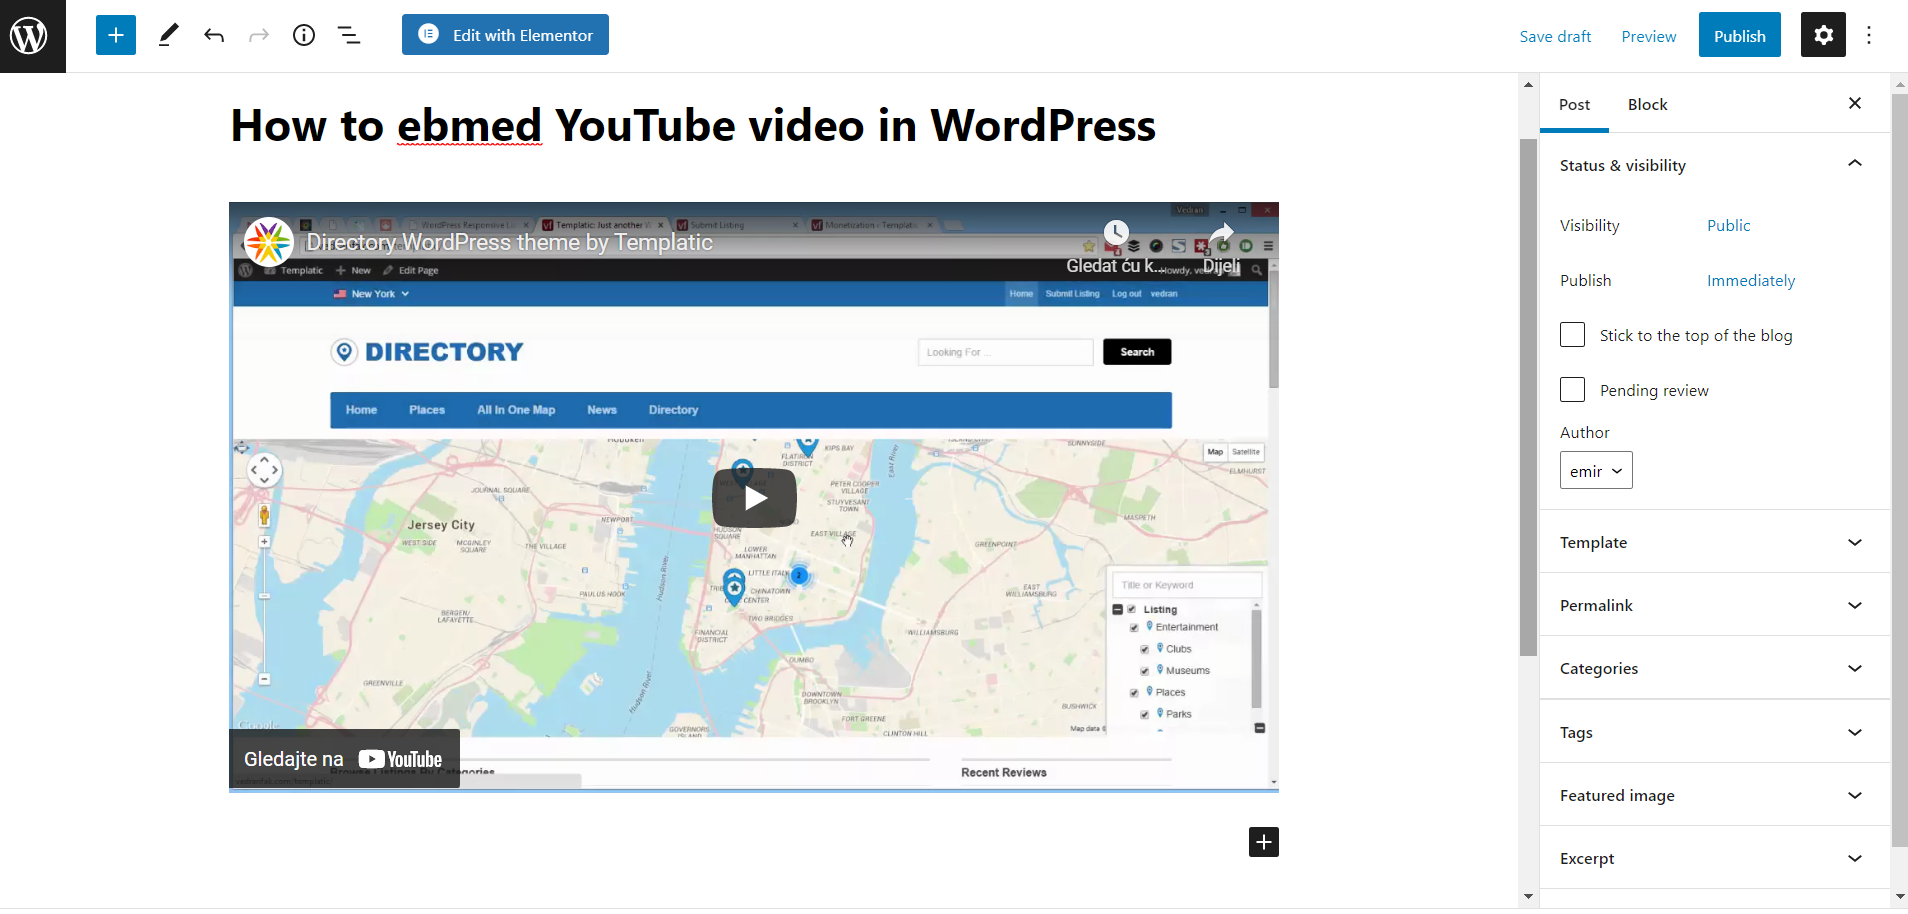 How To Embed YouTube Videos In WordPress Tutorial